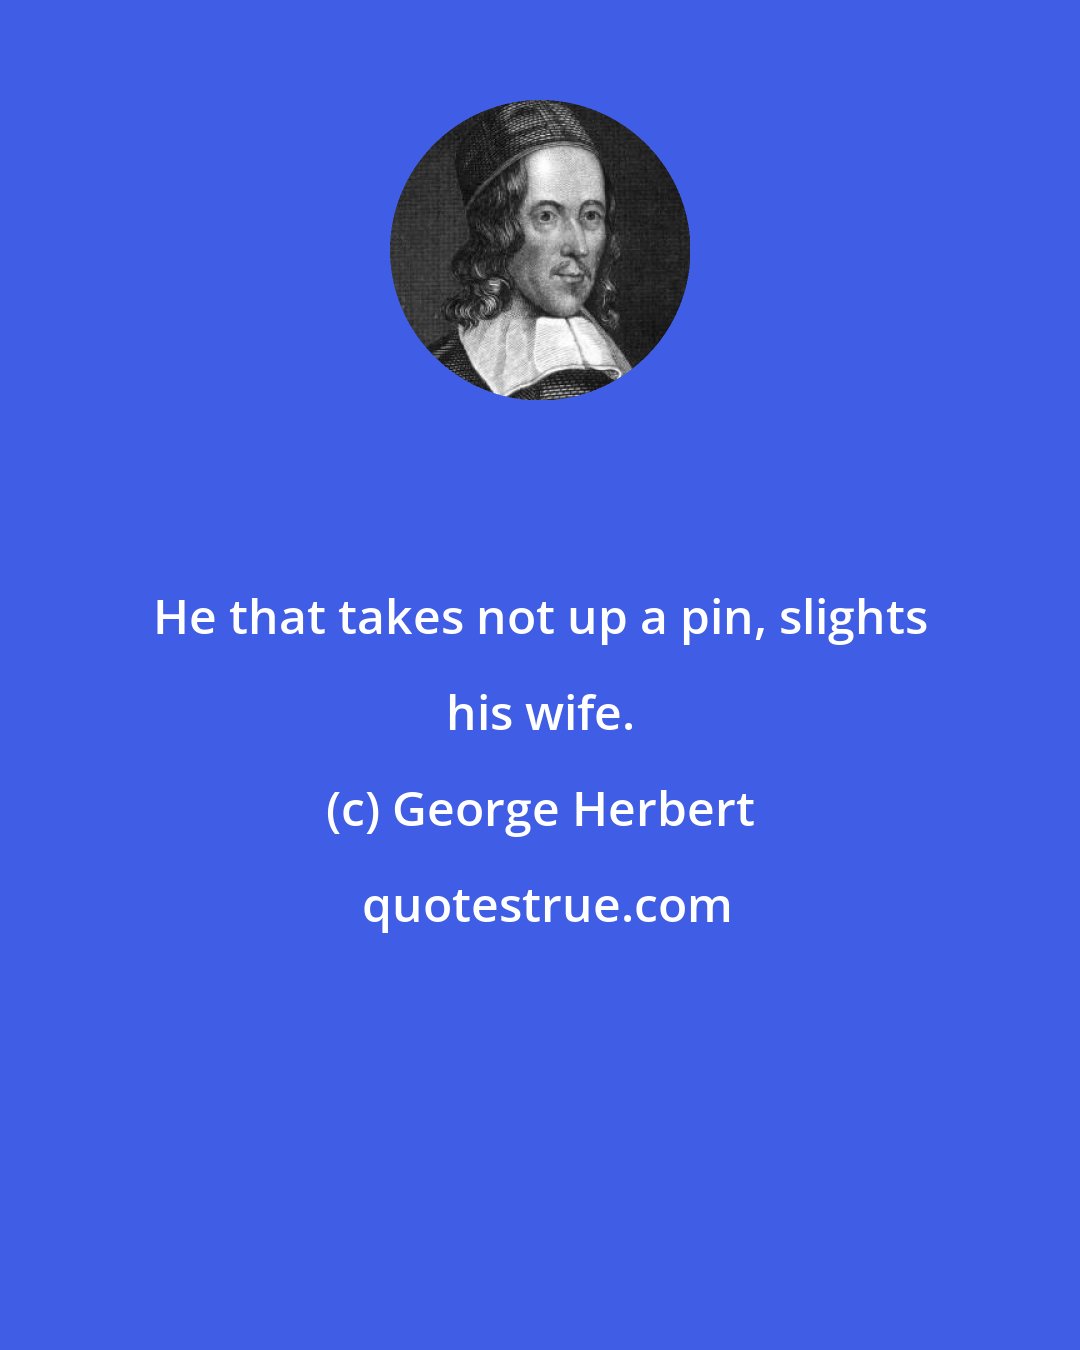 George Herbert: He that takes not up a pin, slights his wife.